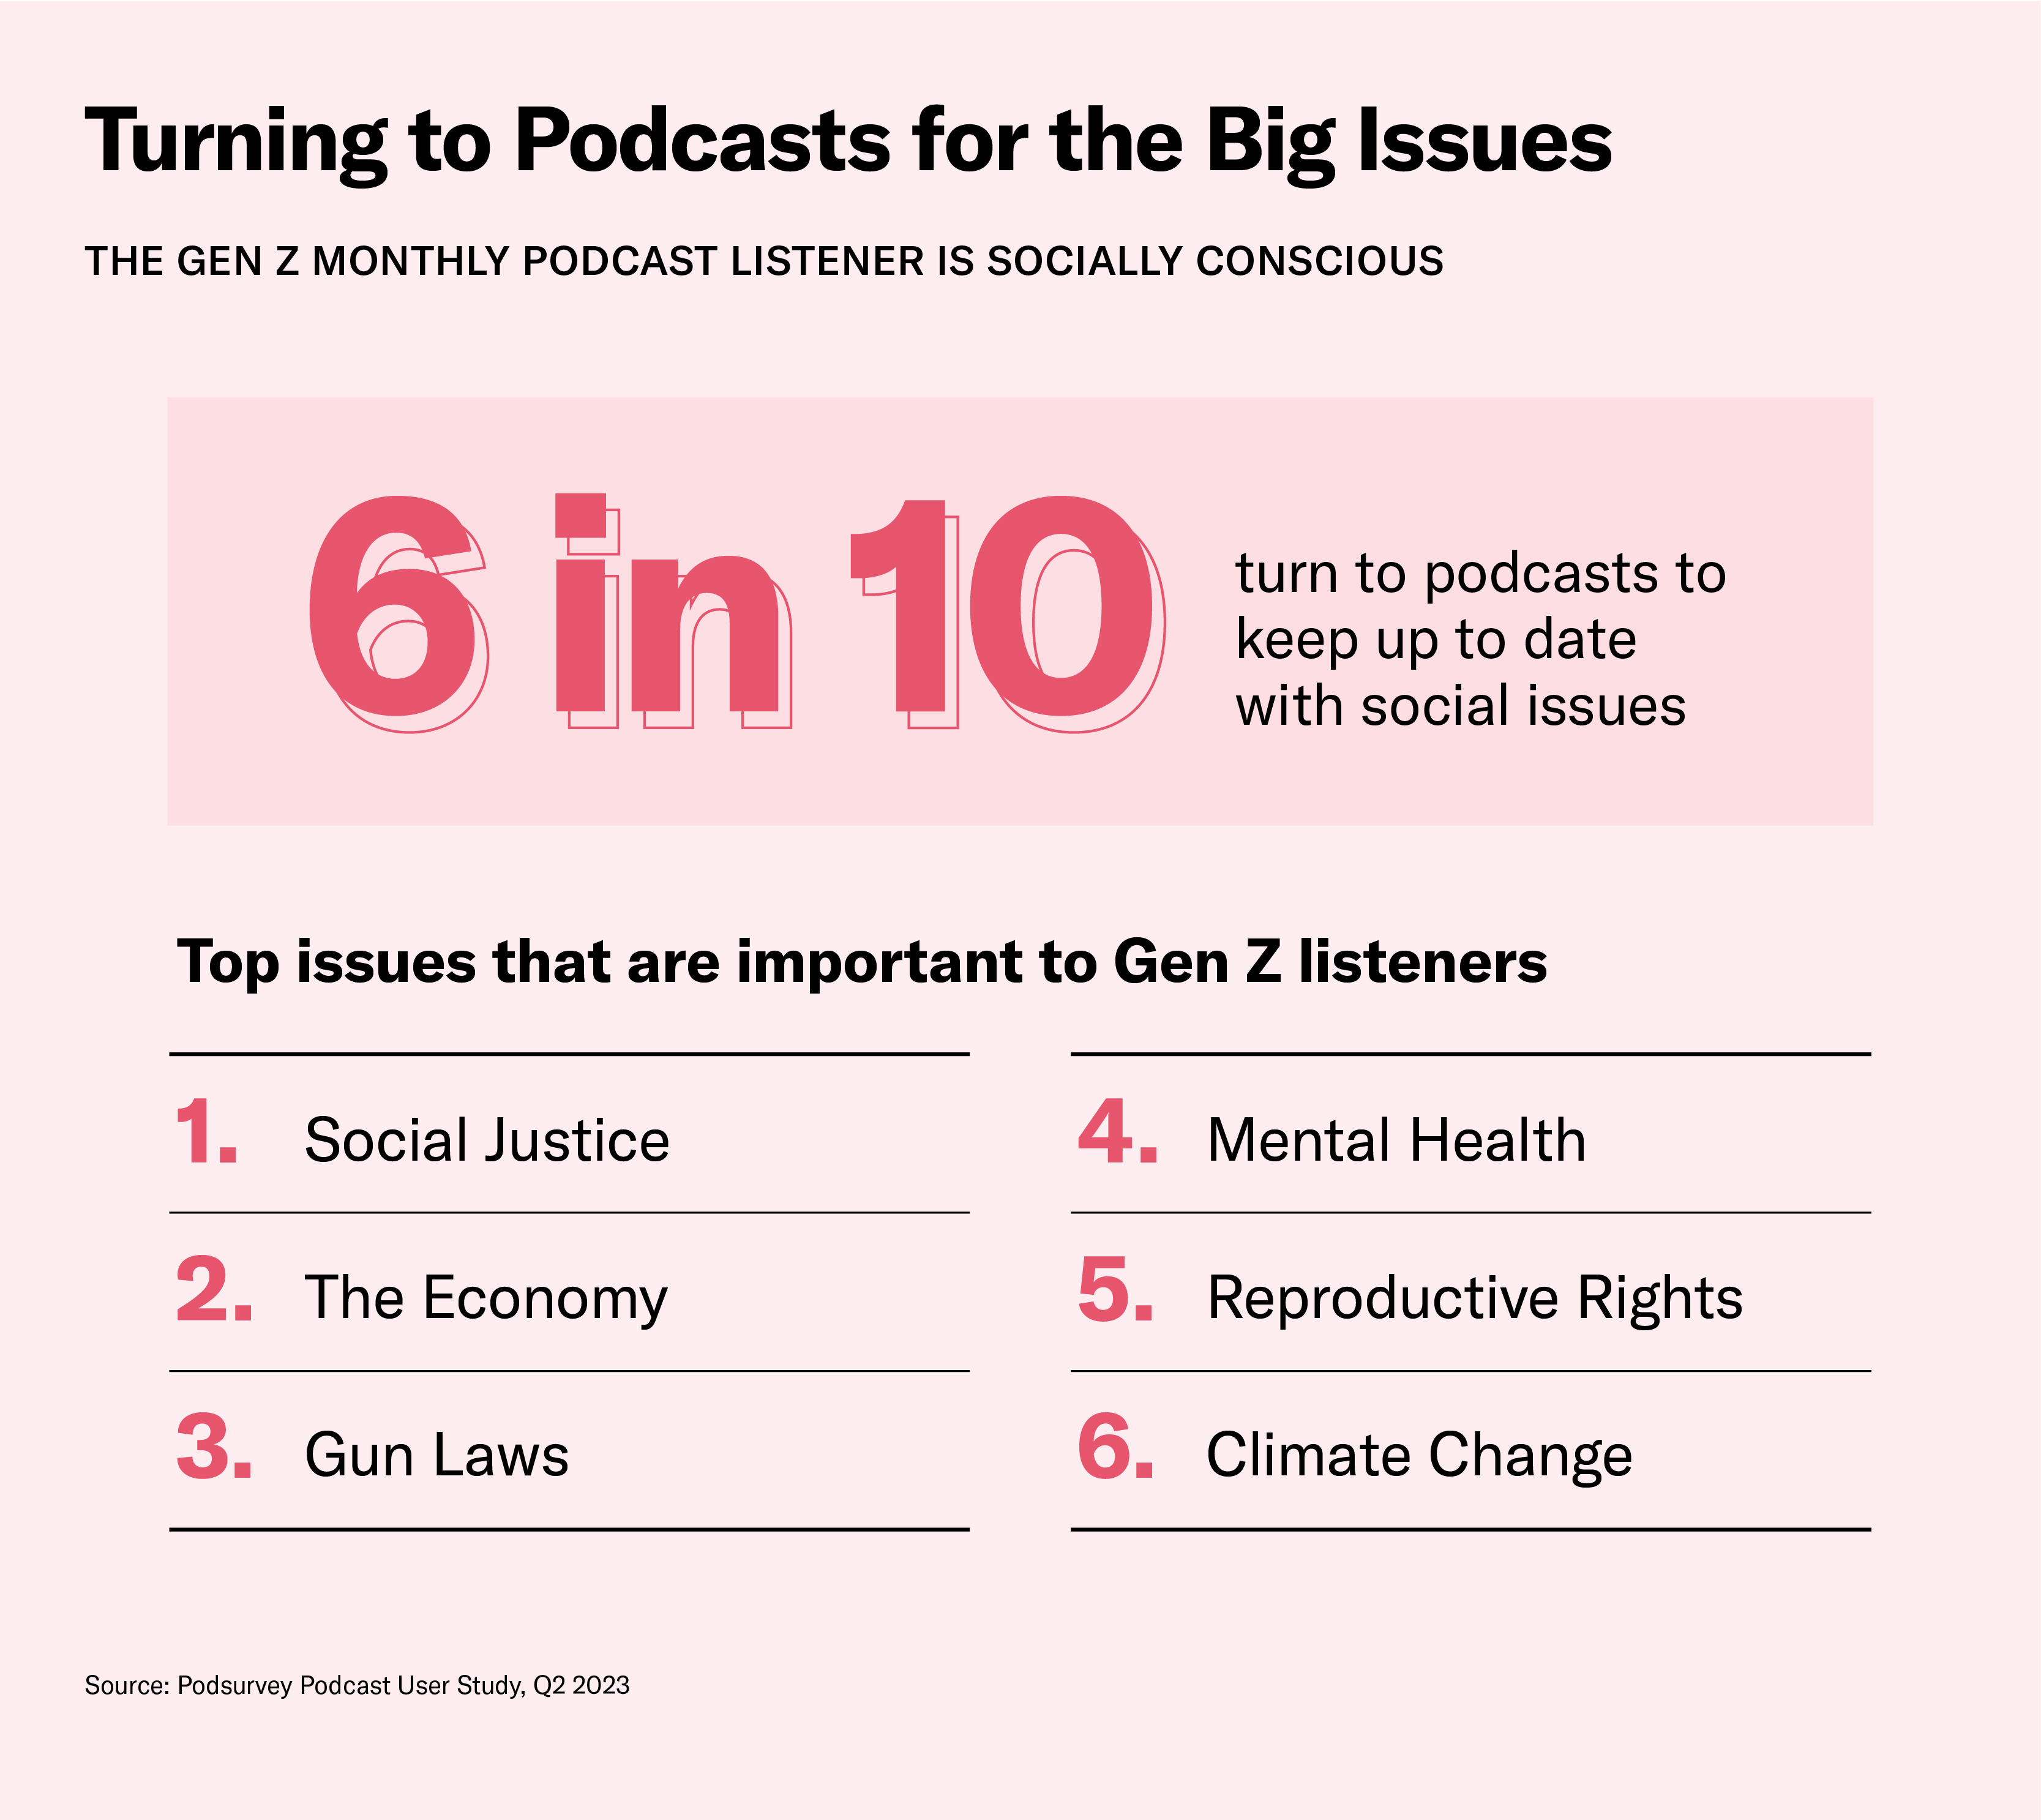 Gen Z turns to podcasts for big issues